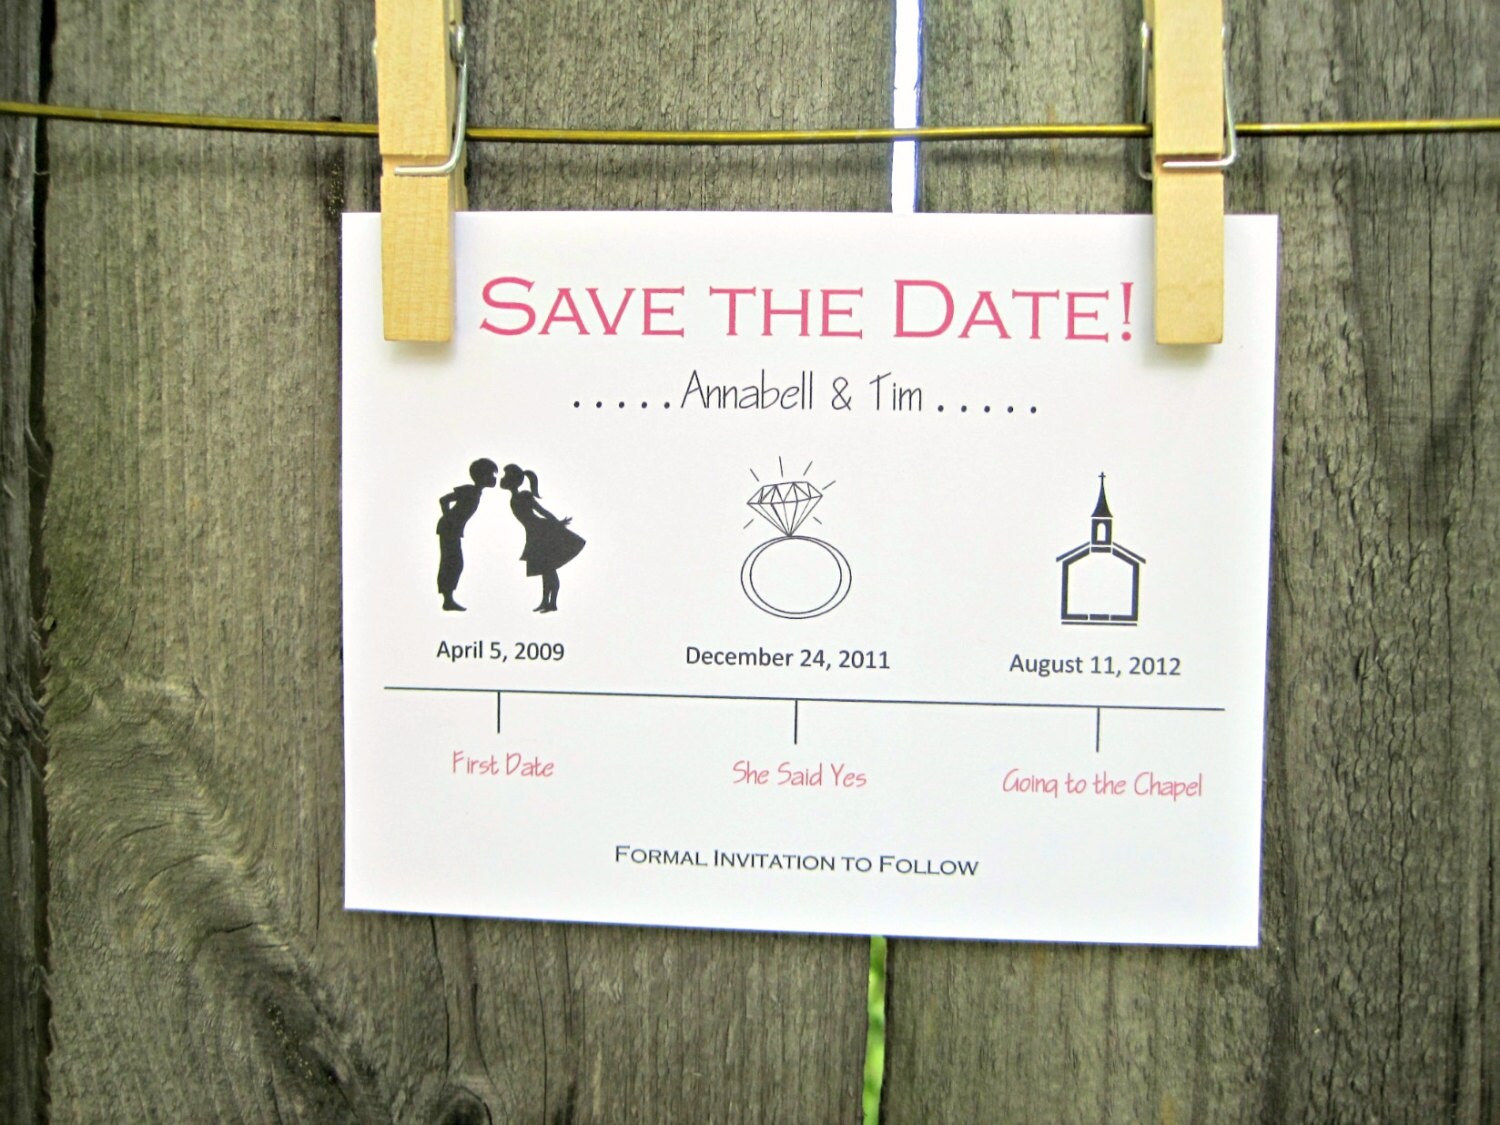 timeline-save-the-date-wedding-card-by-onetenstationery-on-etsy